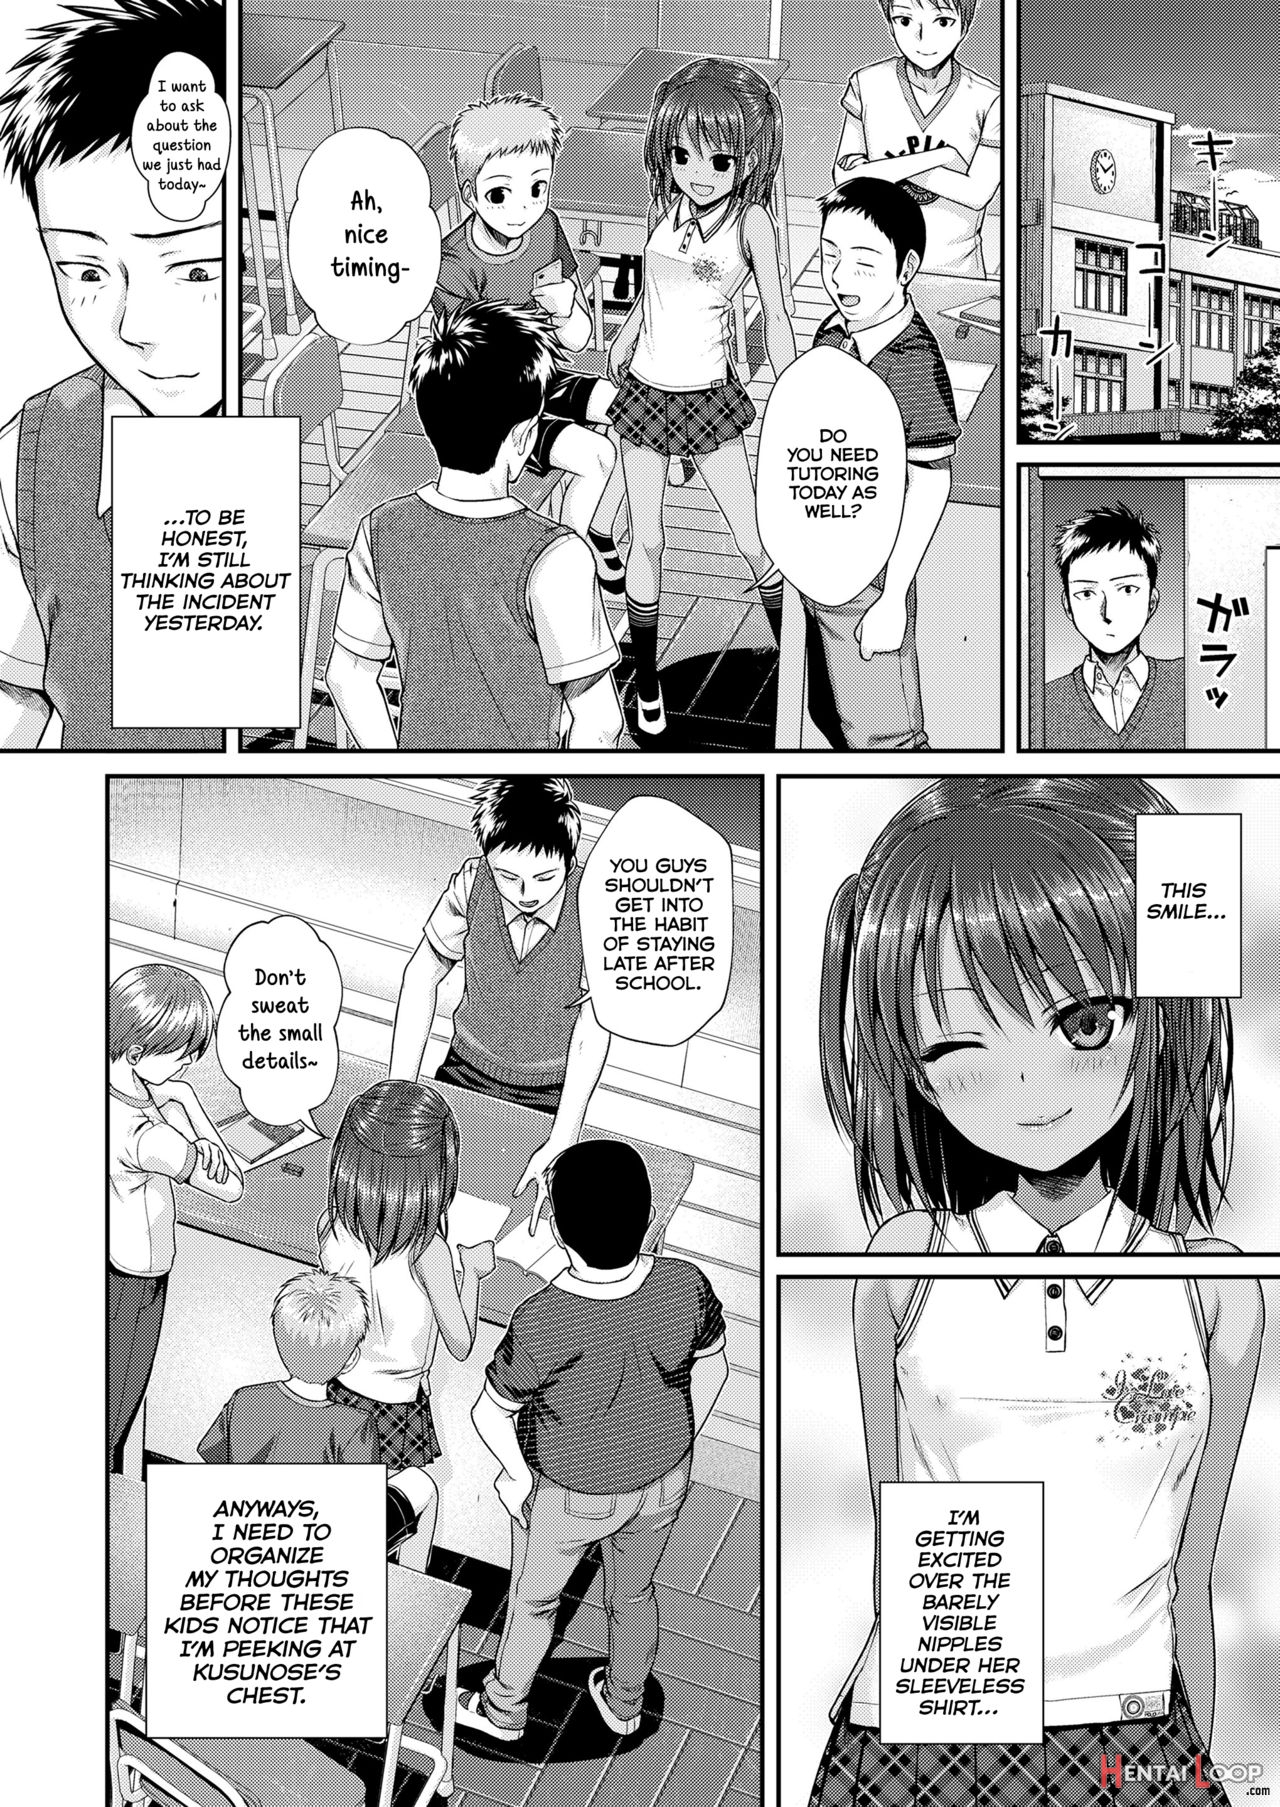 Together With Everyone After School page 8